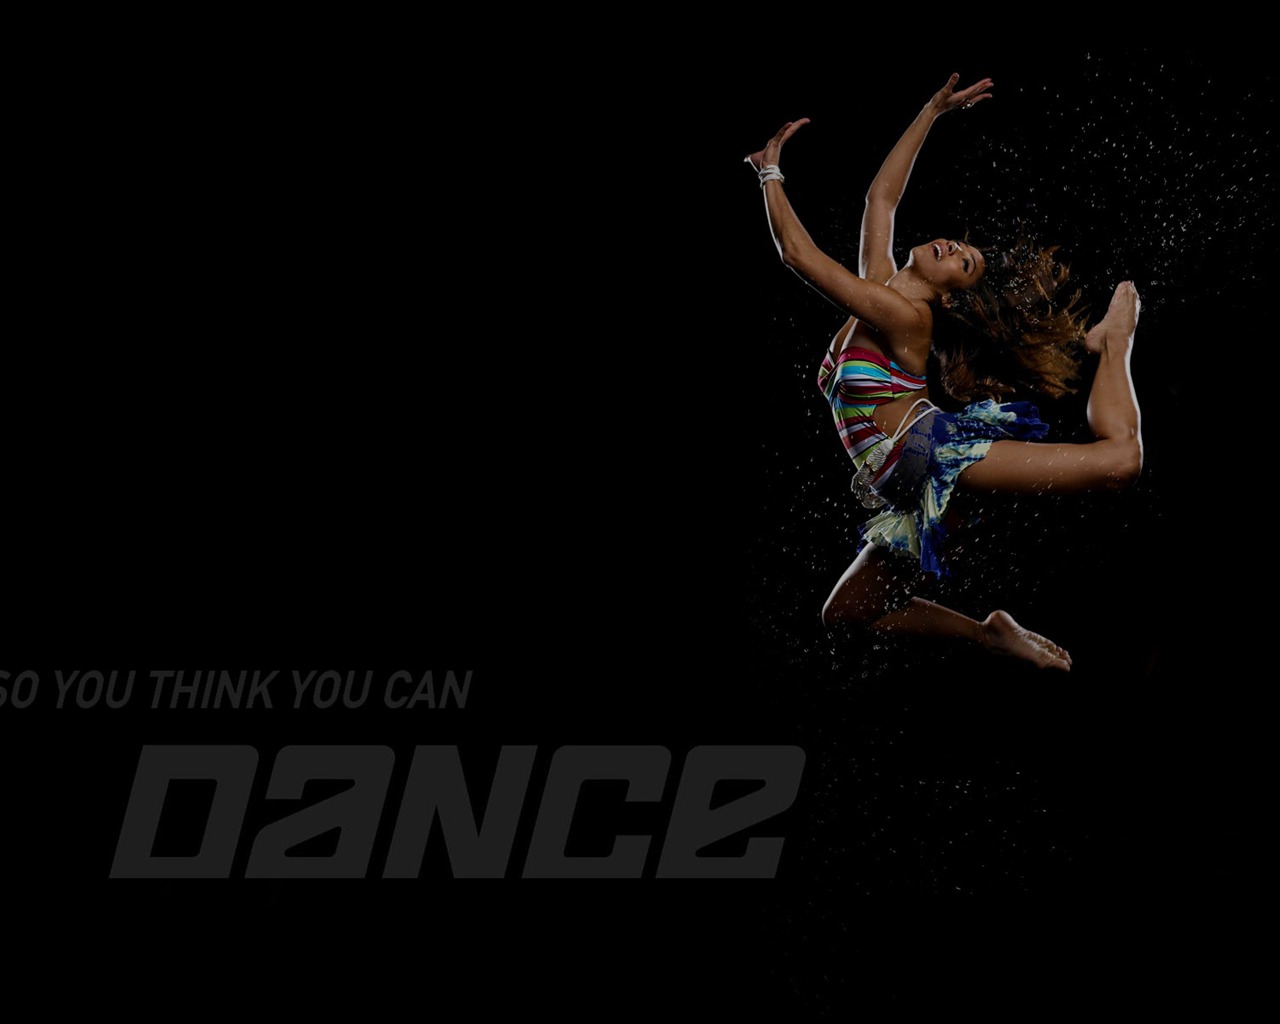 So You Think You Can Dance 舞林争霸 壁纸(二)17 - 1280x1024